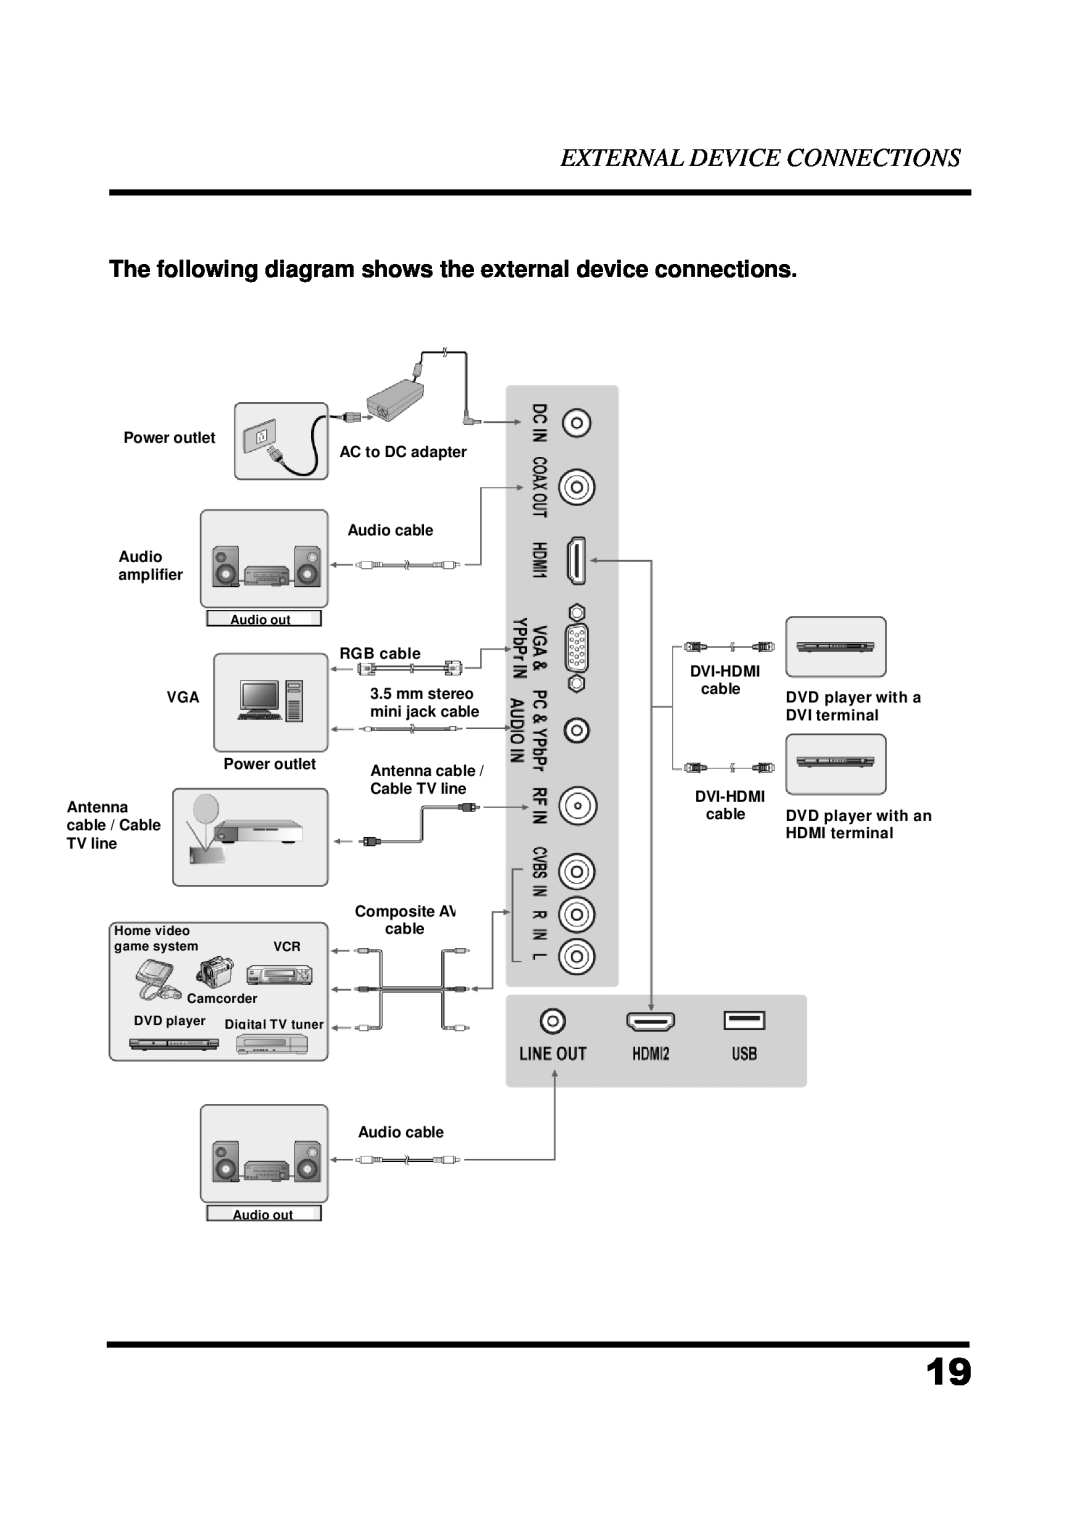 Westinghouse UW48T7HW manual External Device Connections, The following diagram shows the external device connections 